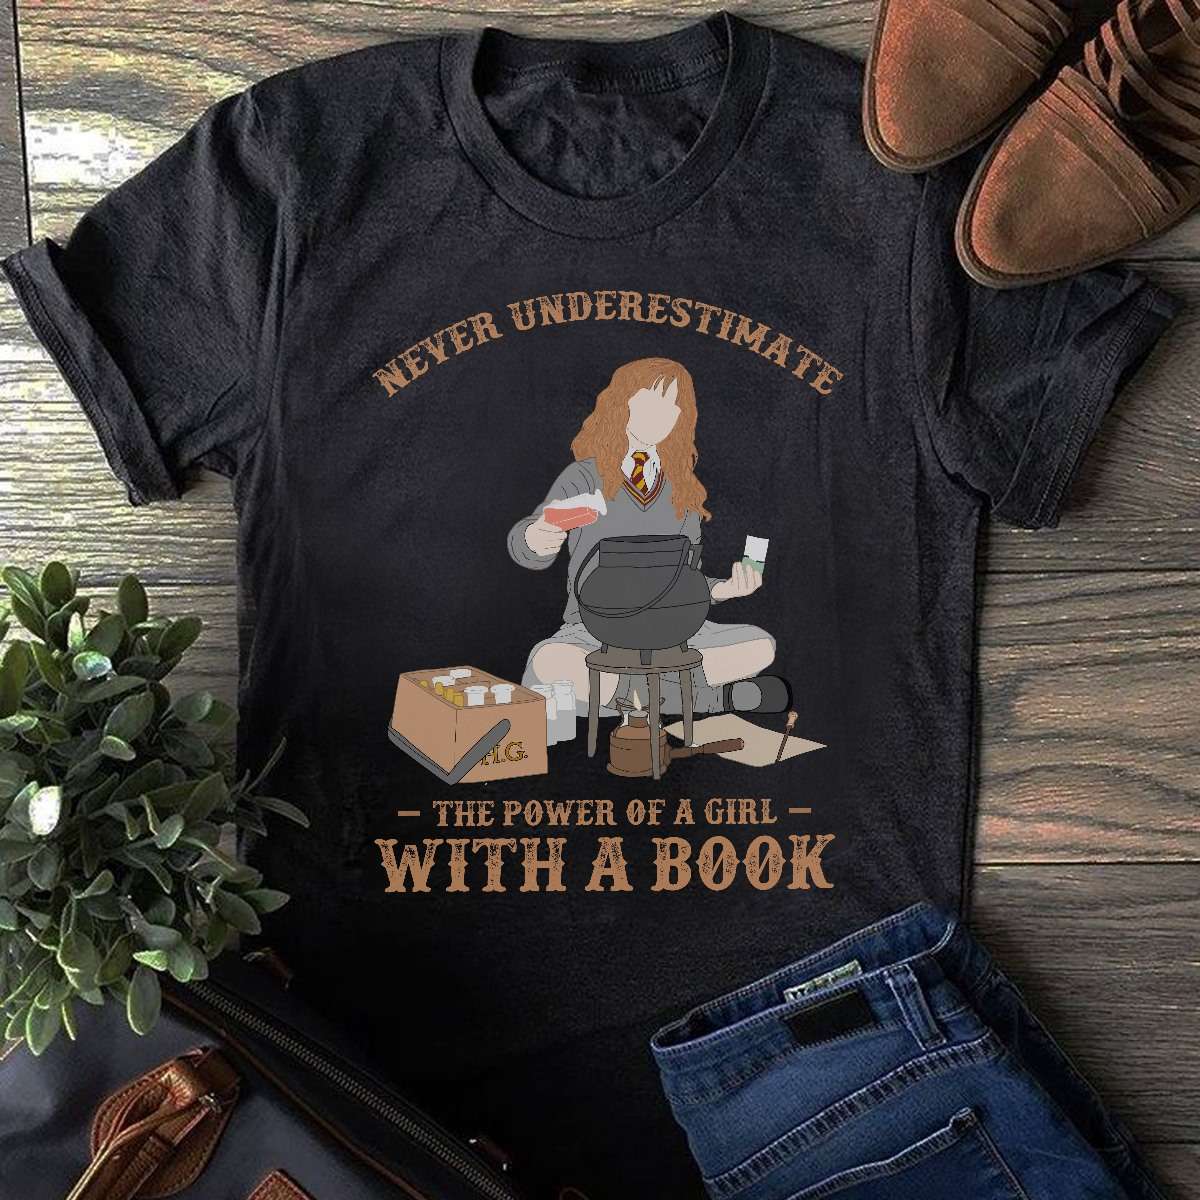 Never undertimate the power of a girl with a book - Witch woman, book lover